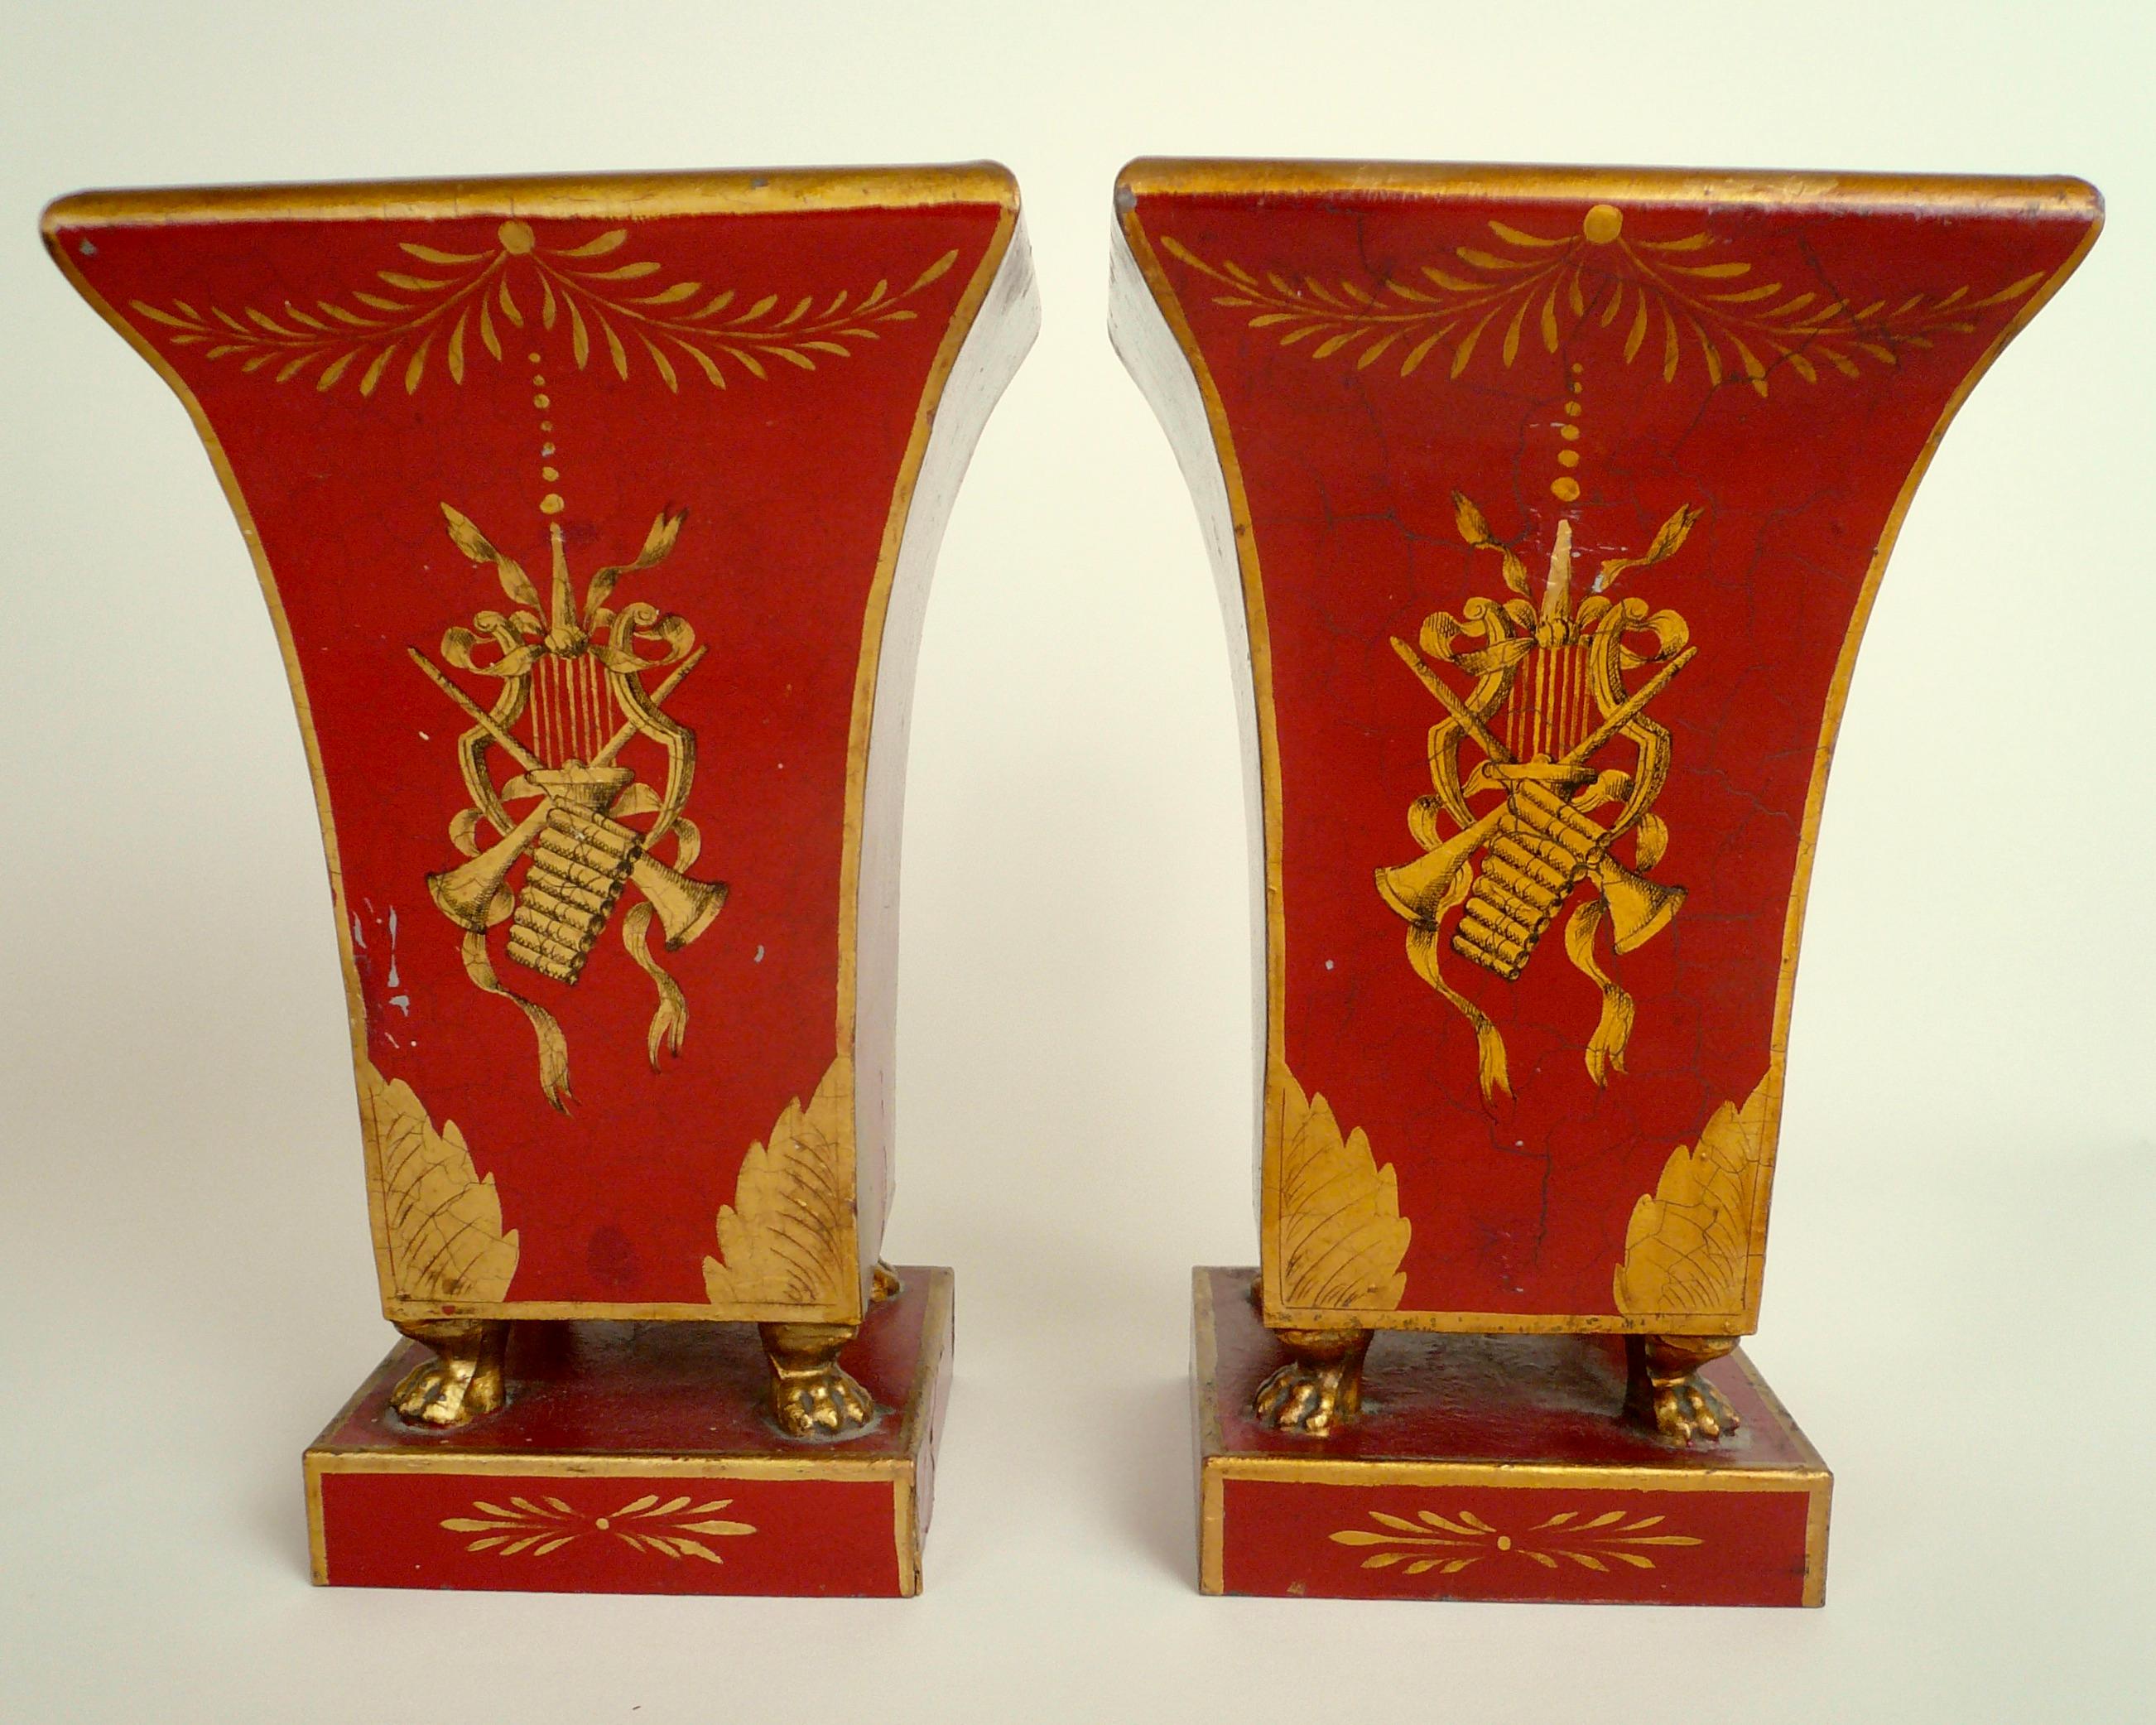 This handsome pair of urns, or cachepots are are decorated with gilt Classical motifs including musical trophies and paw feet.